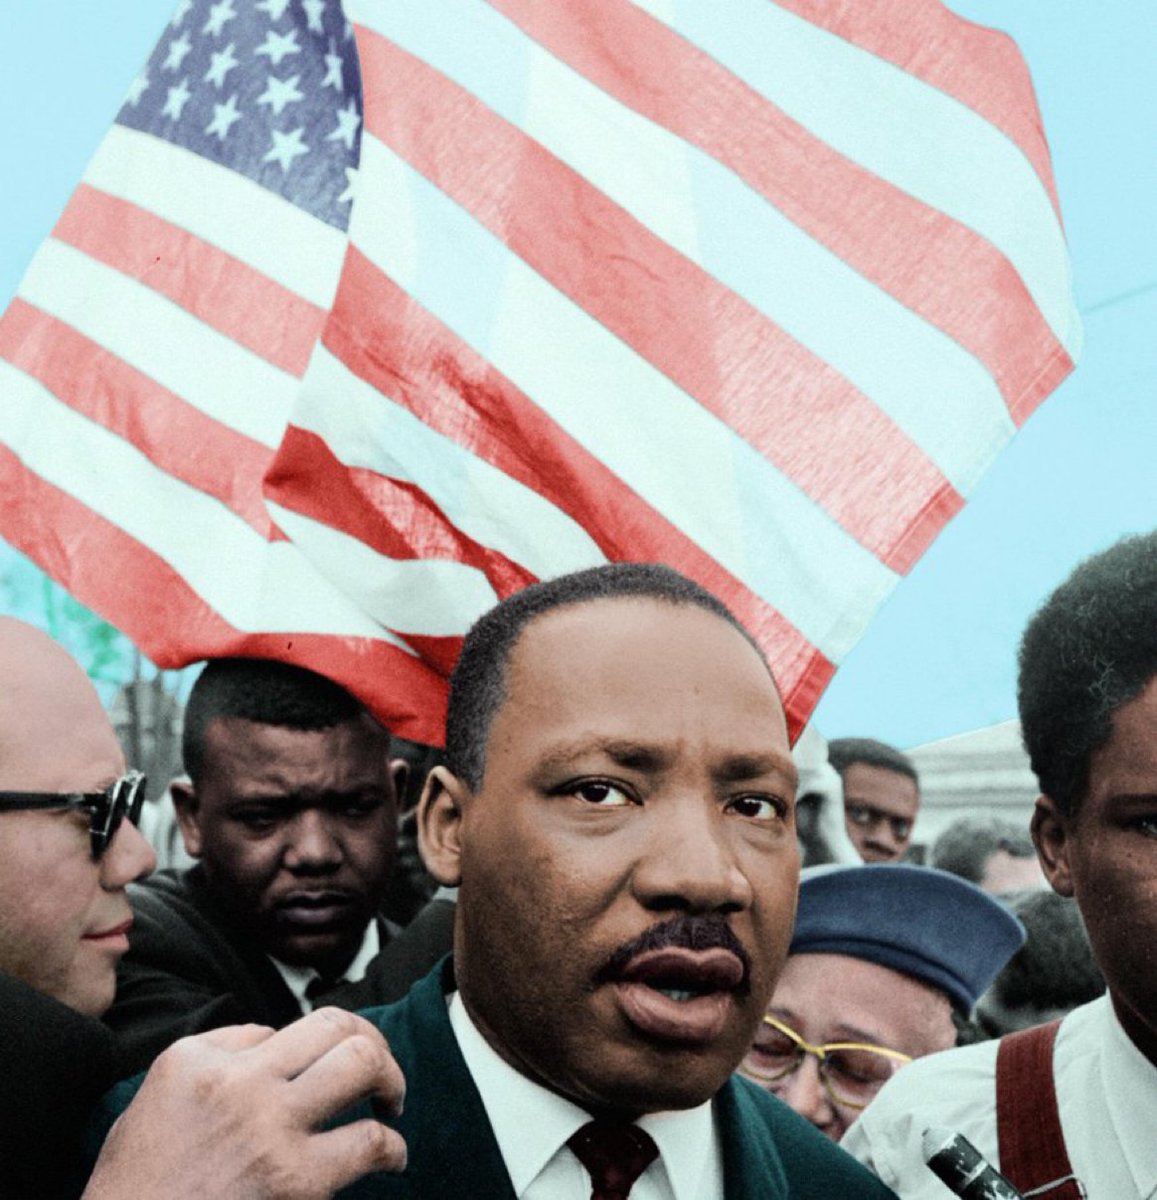 'I have a dream that one day this nation will rise up and live out the true meaning of its creed: 'We hold these truths to be self-evident, that all men are created equal.'' #MartinLutherKingJr #MLK #America #USA